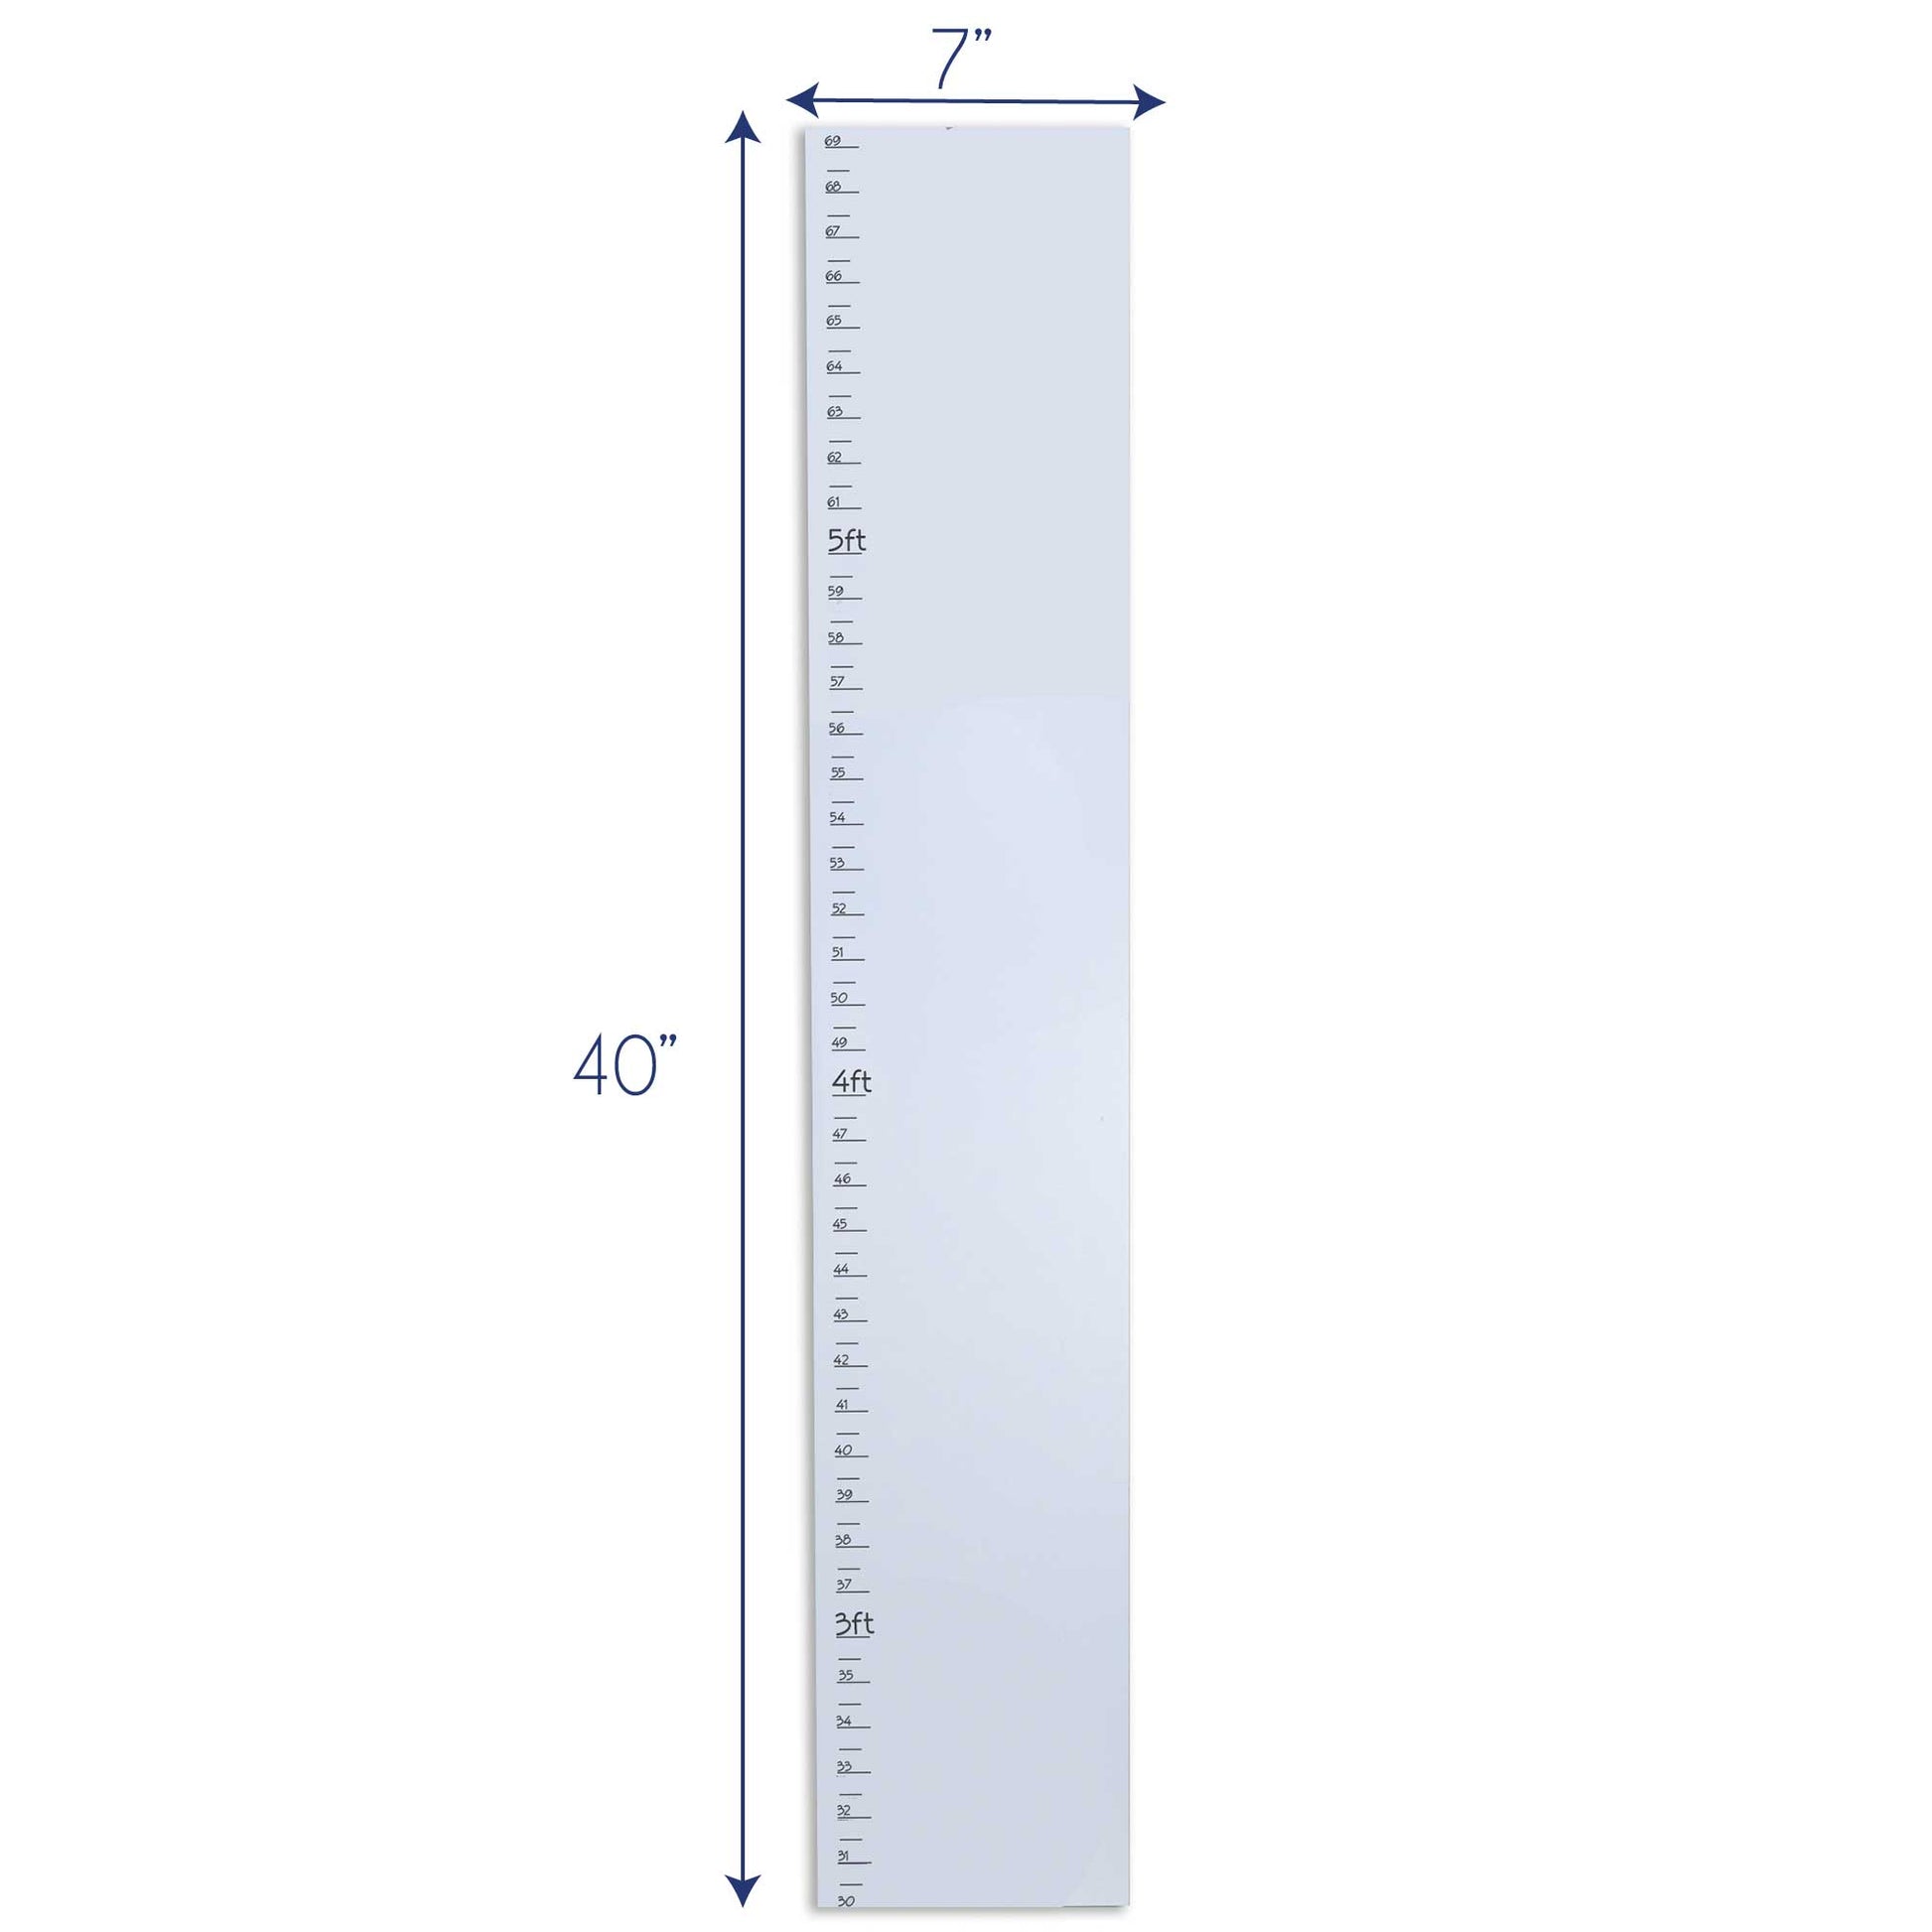 Personalized White surfboard Growth Chart